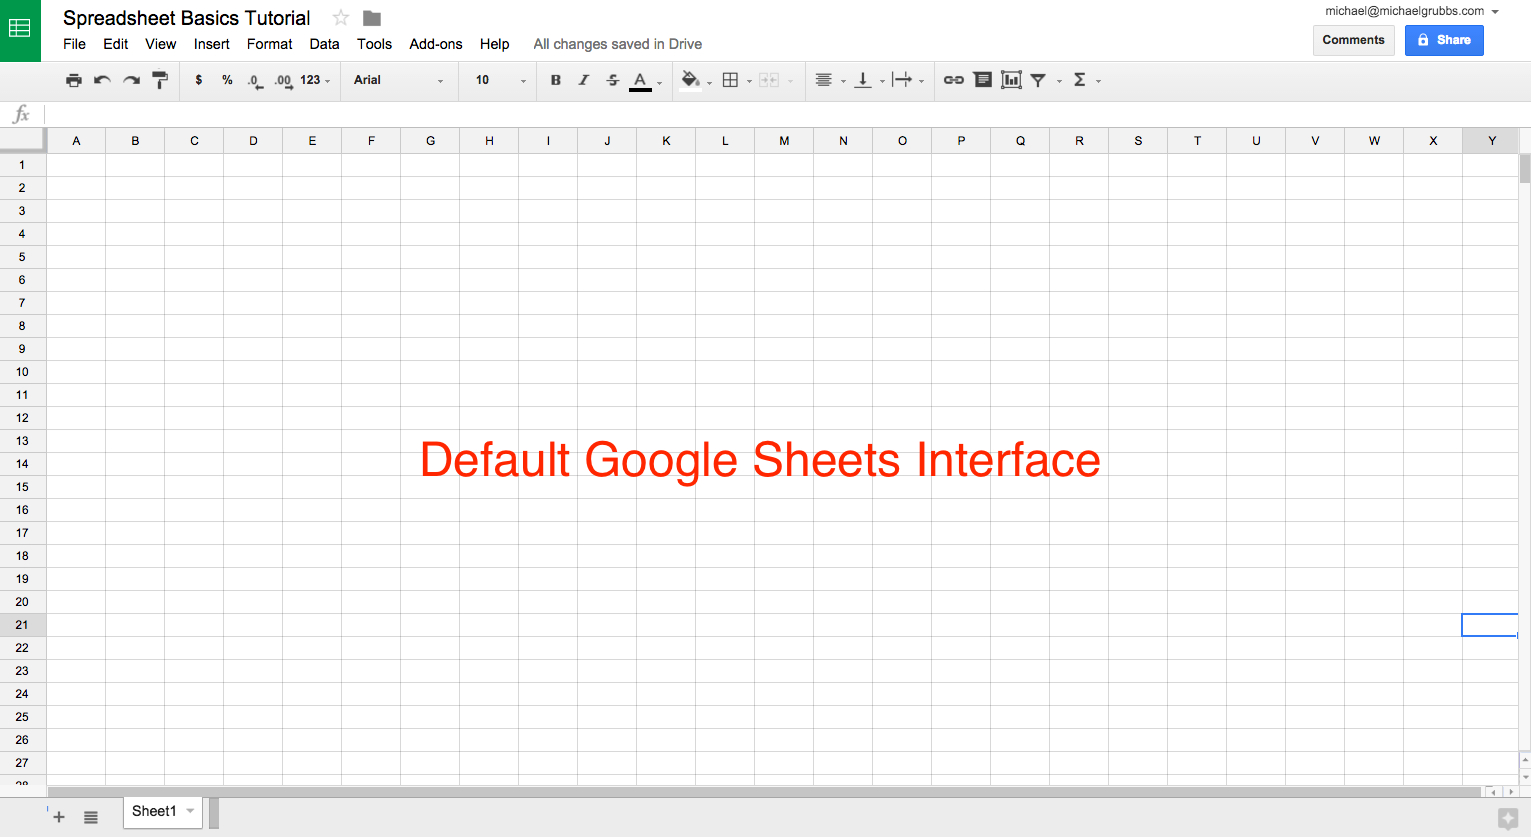 Create Spreadsheet With Google Sheets 101: The Beginner's Guide To Online Spreadsheets  The